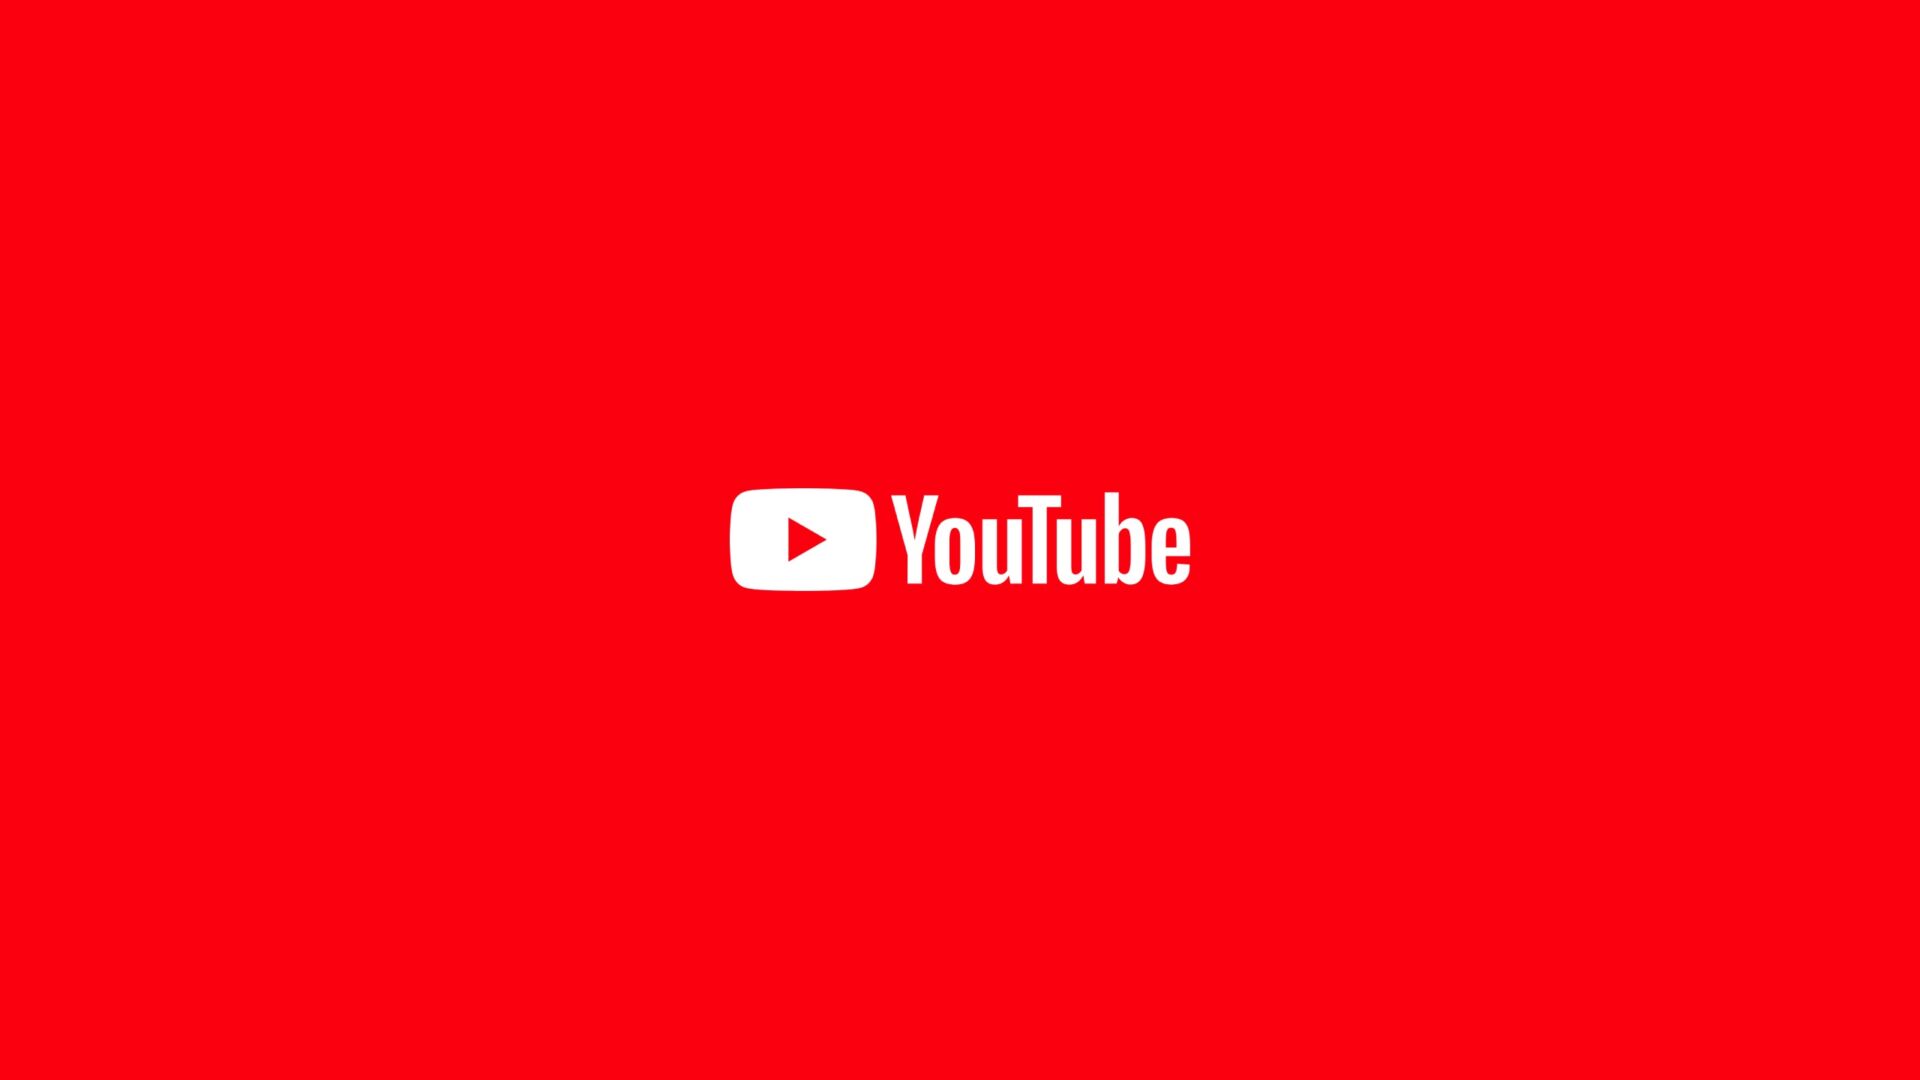 Find names and details for deleted or private videos in your YouTube playlist